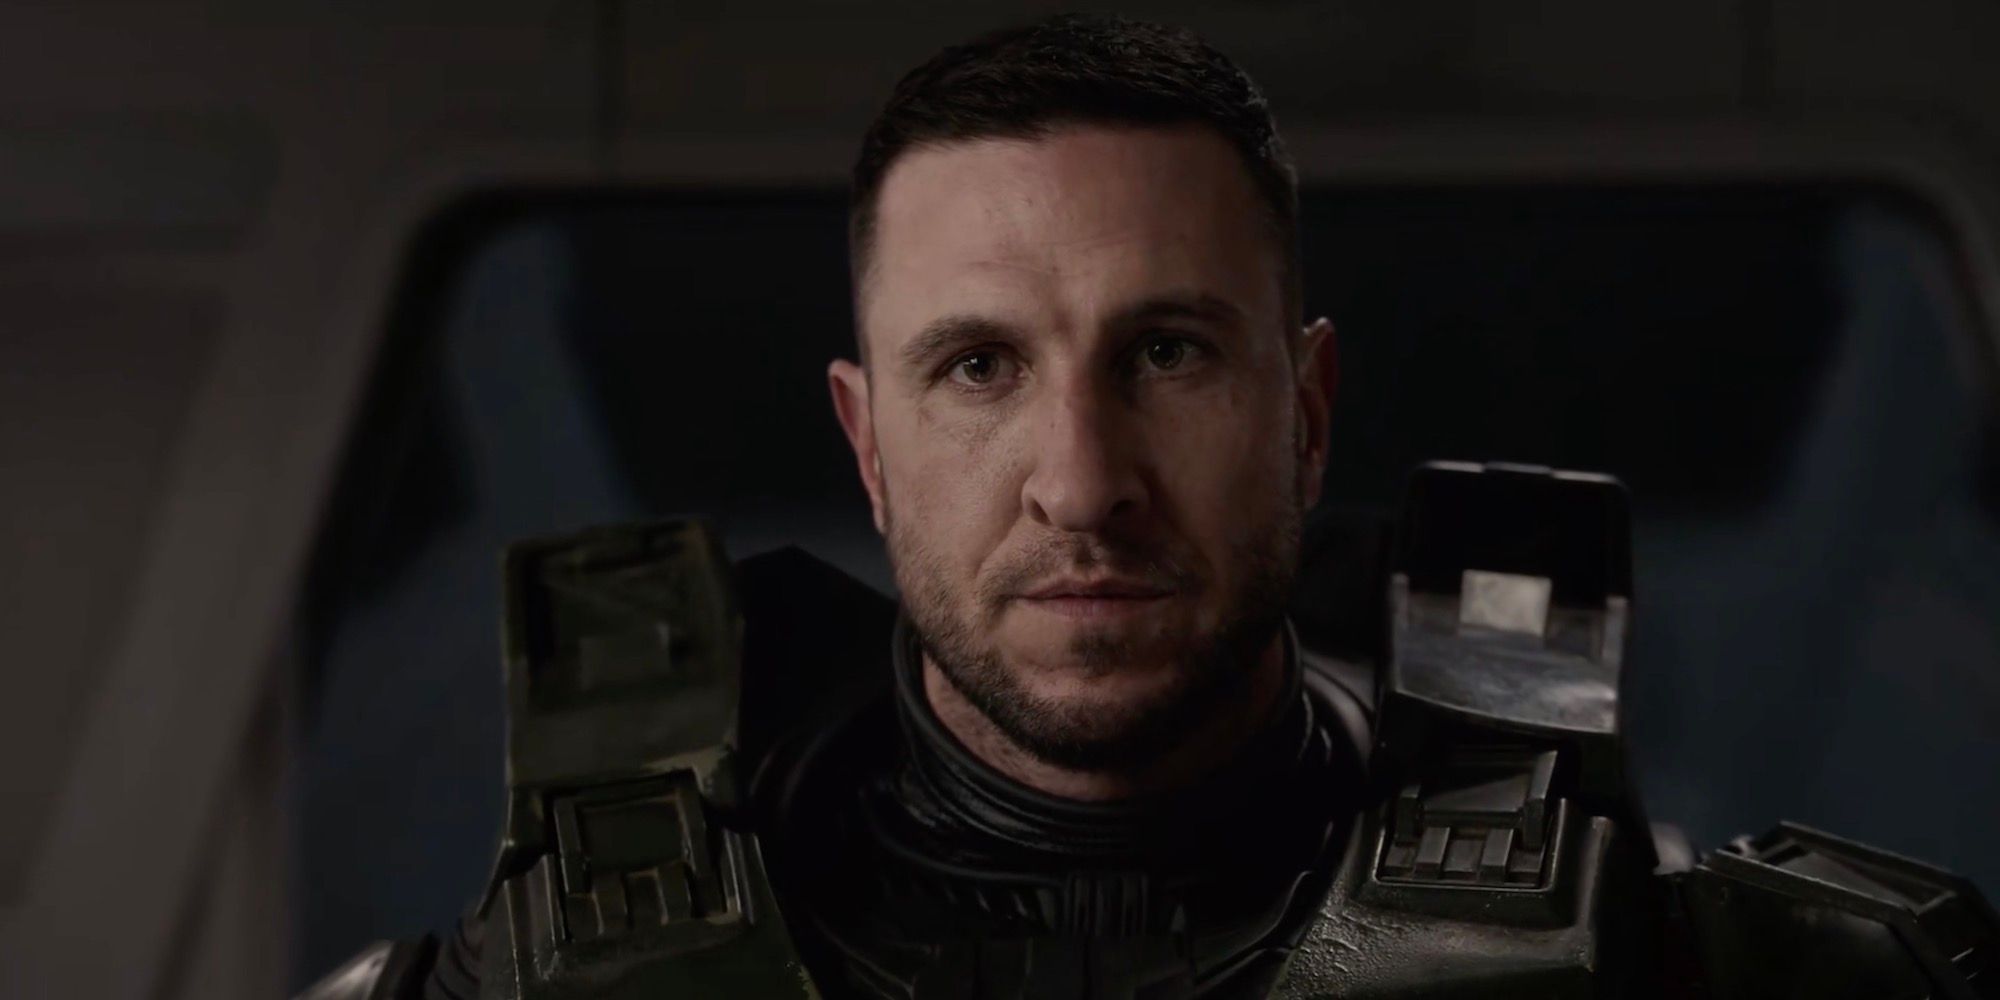 Master Chief without his helmet from the Halo TV show